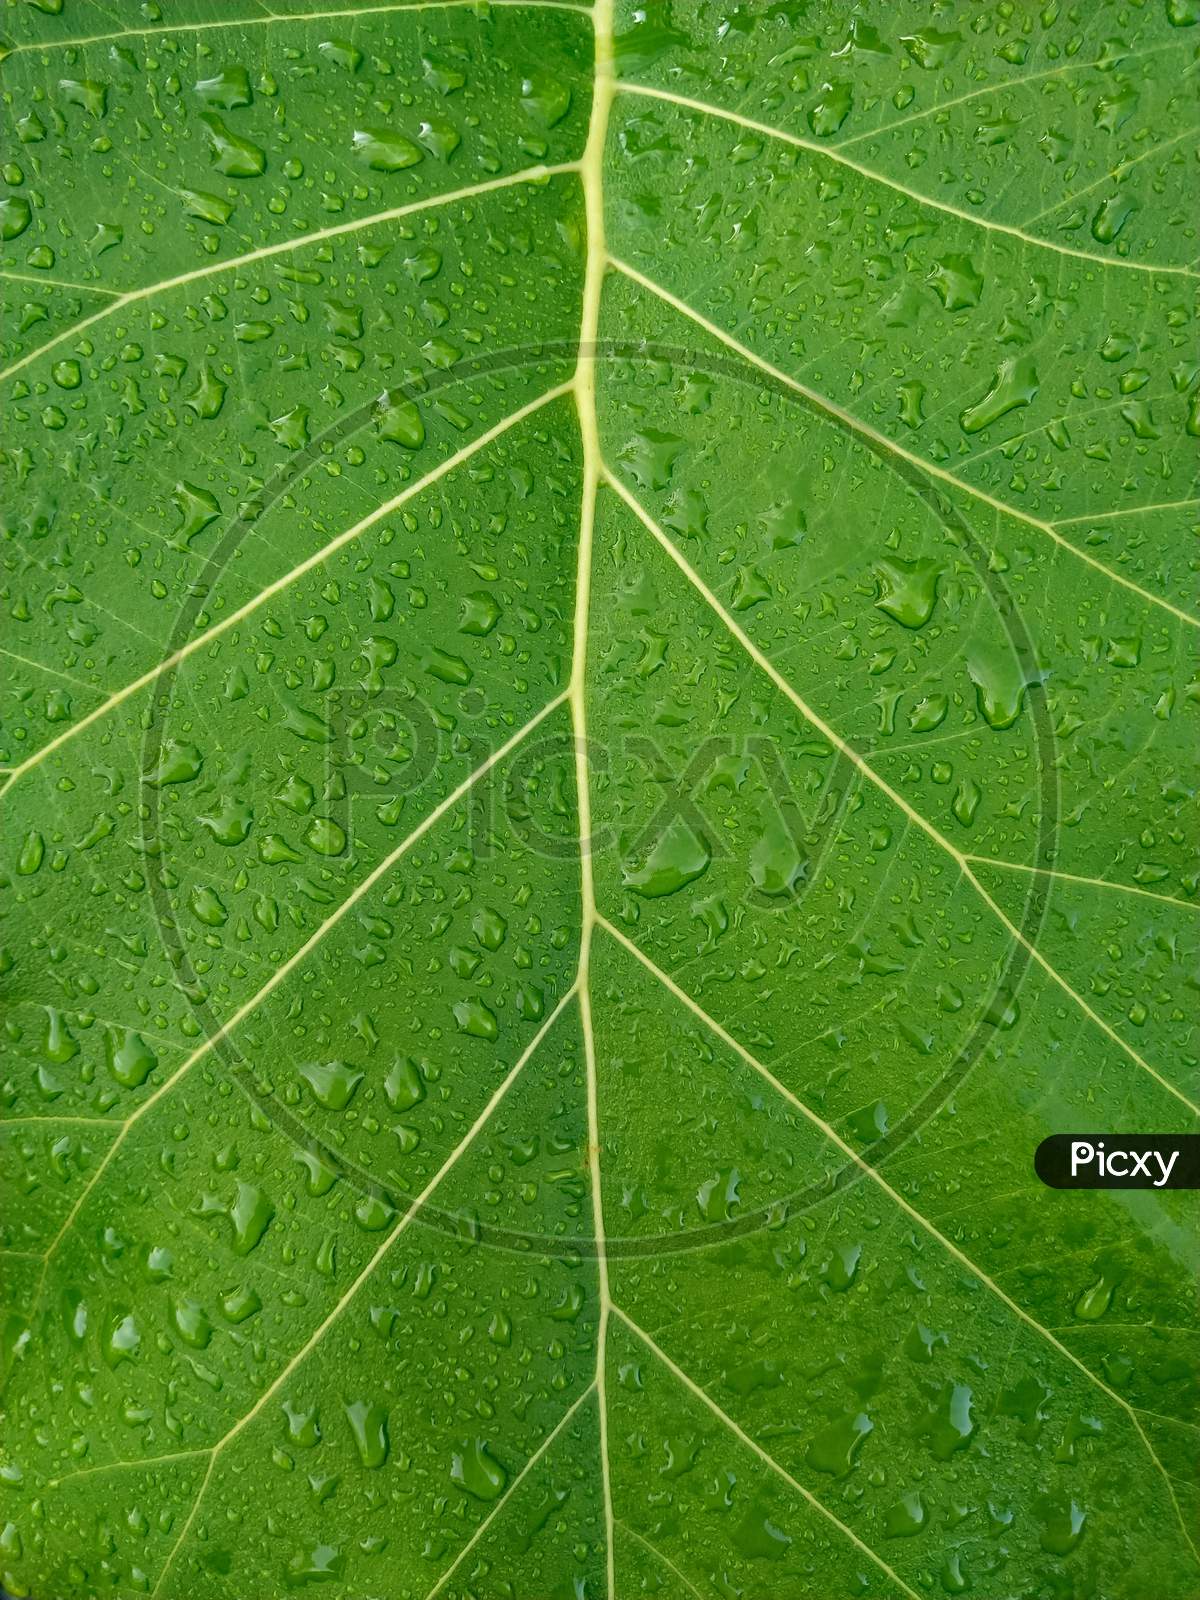 Green Leaf With Leaf Veins And Water Droplets